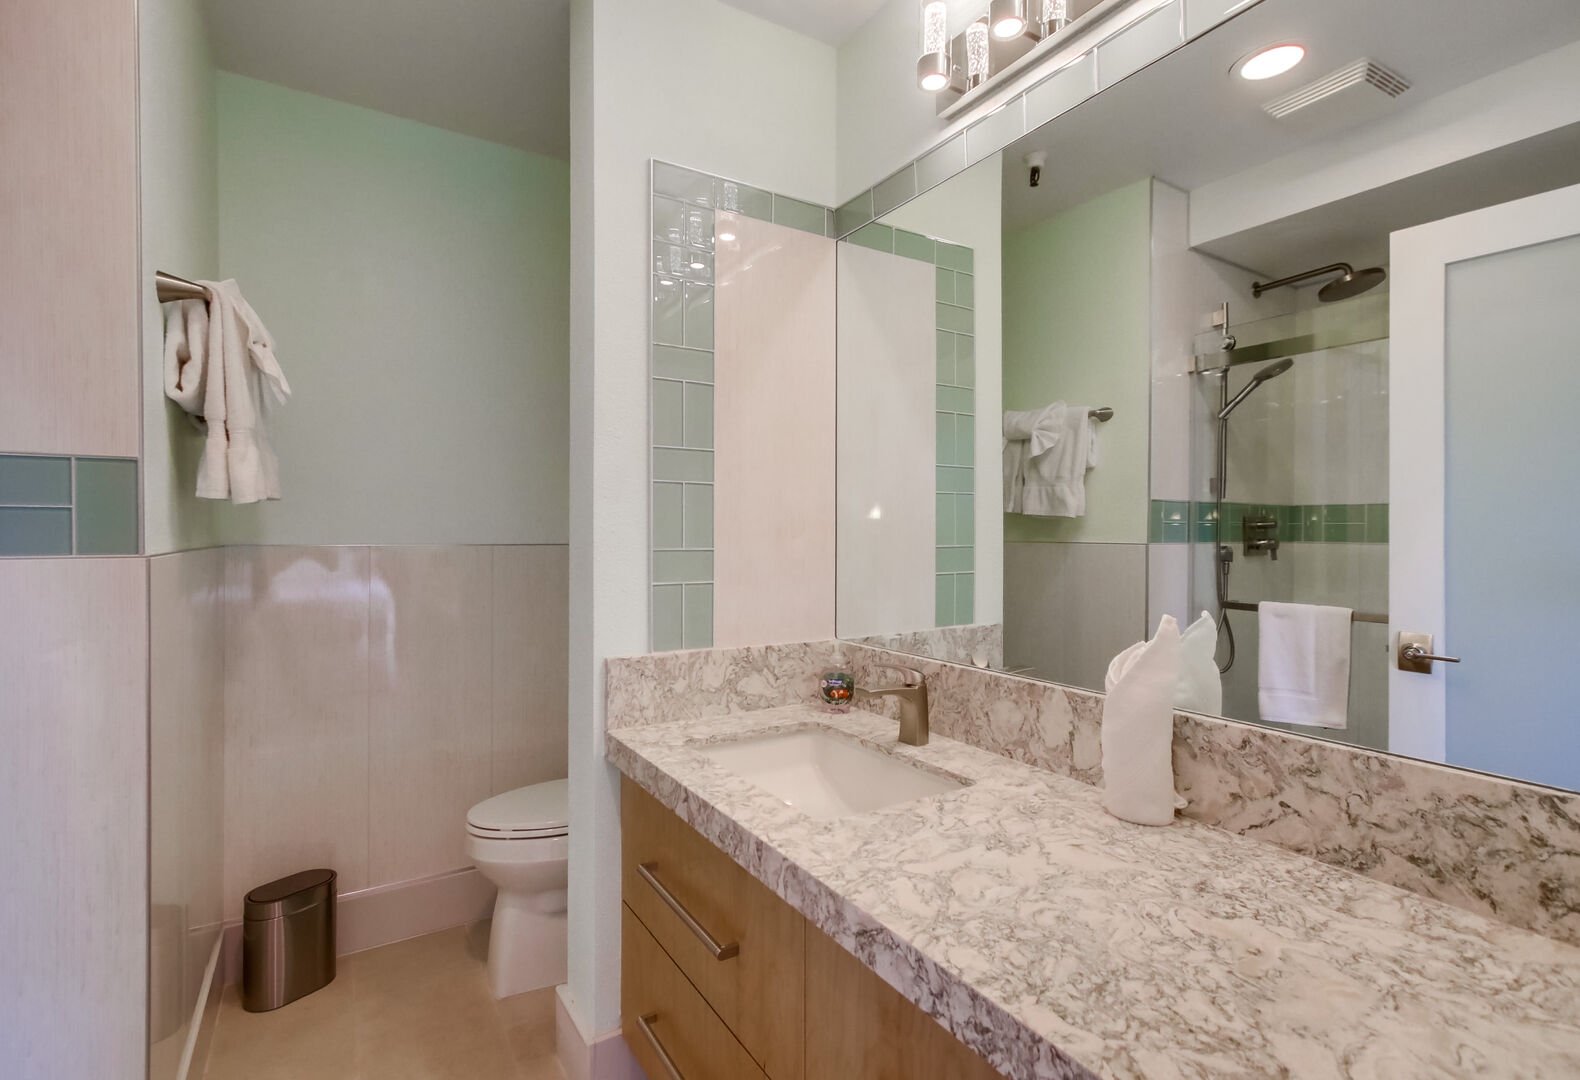 Brand new remodeled full master bathroom with new light fixtures and countertops!